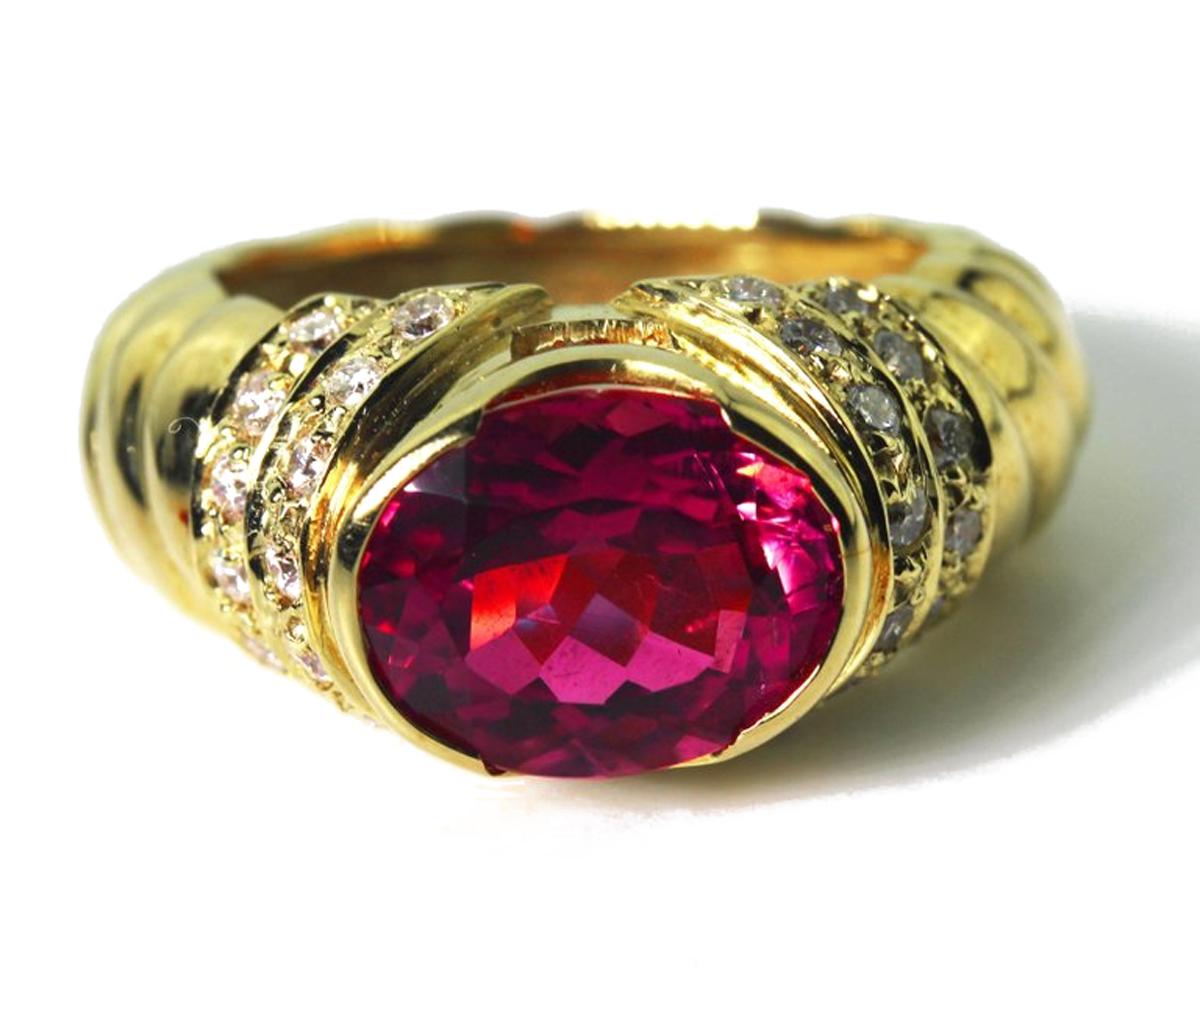 Sparkling  deep 4 carat oval pinky red Brasilian natural Tourmaline enhanced with small sparkling brilliant white diamonds set in a unique handmade 18 Karat yellow gold ring size  7 (sizable for free). 